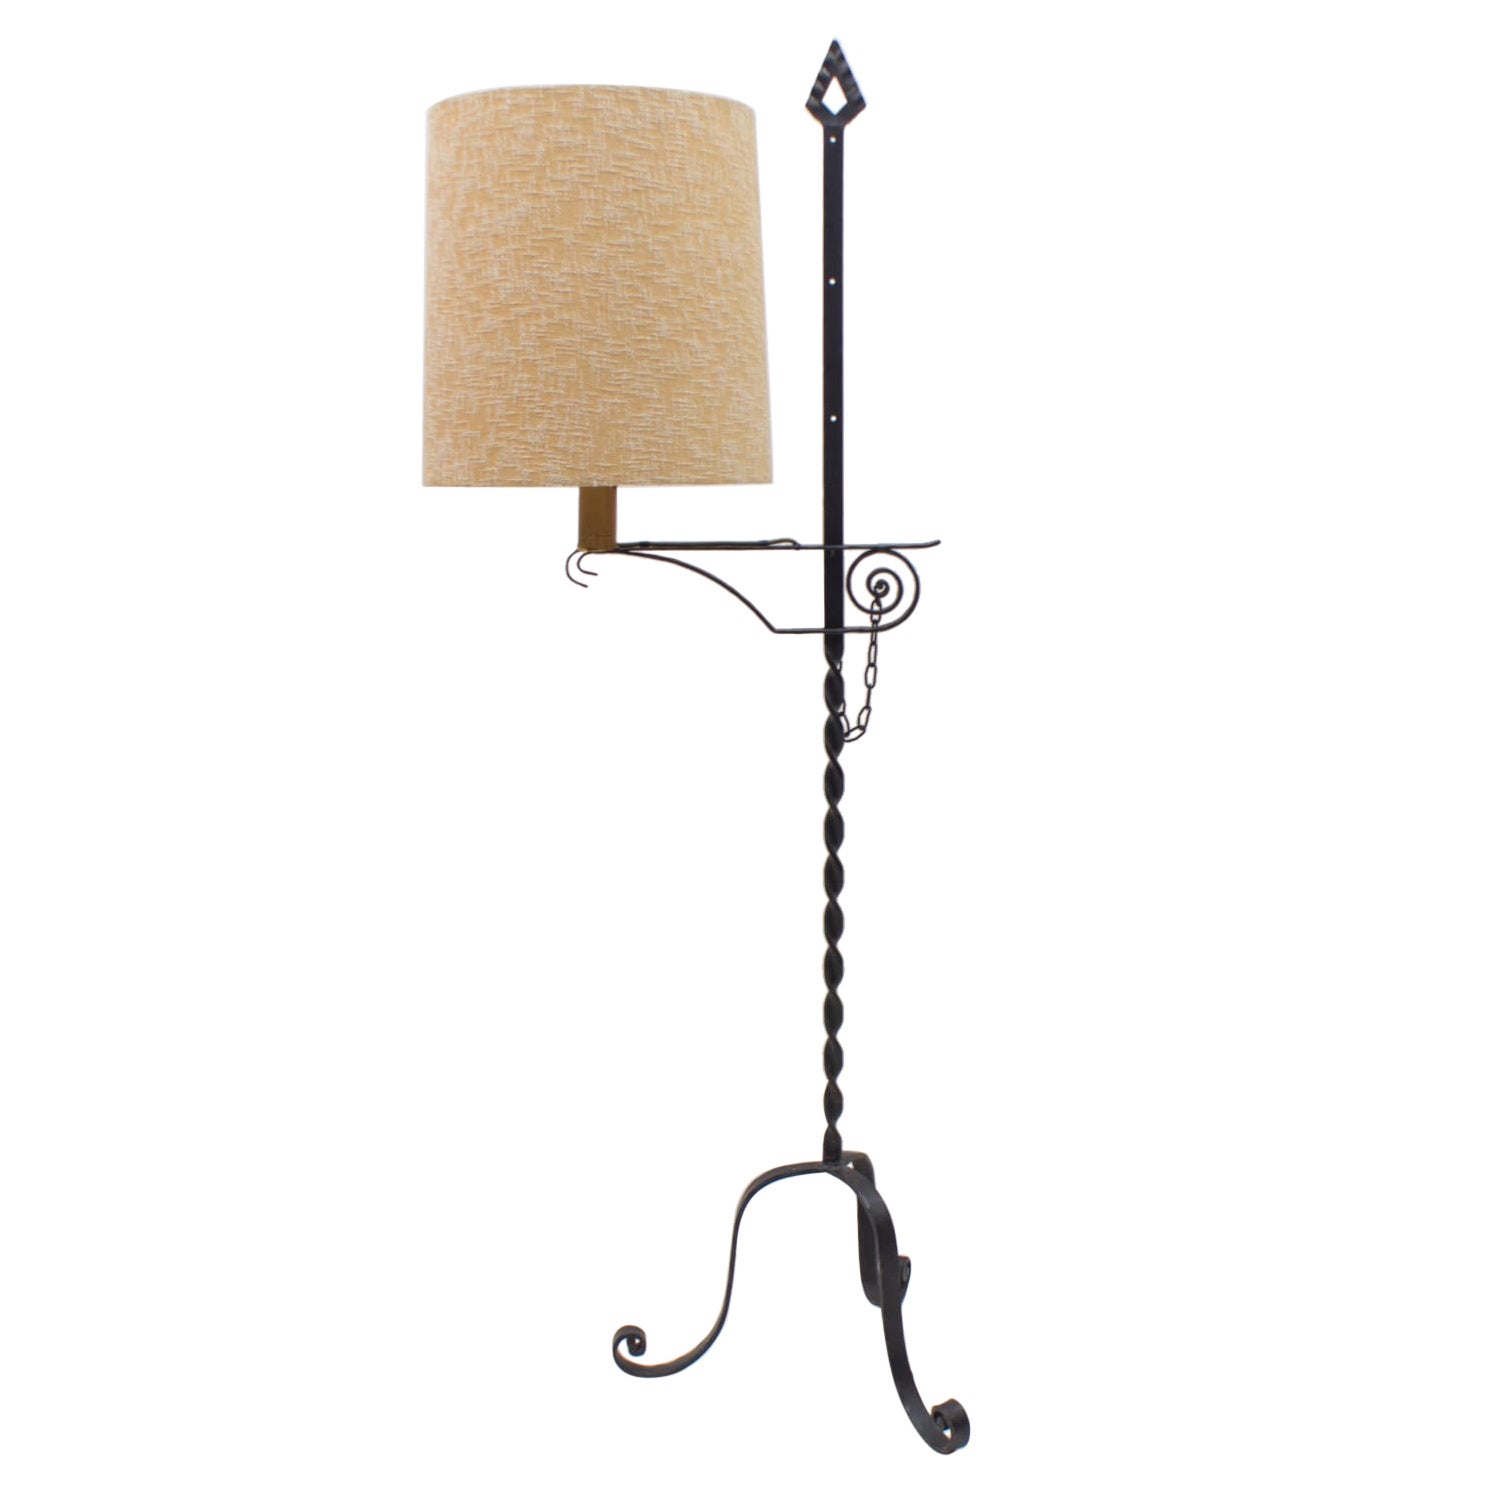 Lovely Adjustable Wrought Iron Floor Lamp Attributed to Raymond Subes